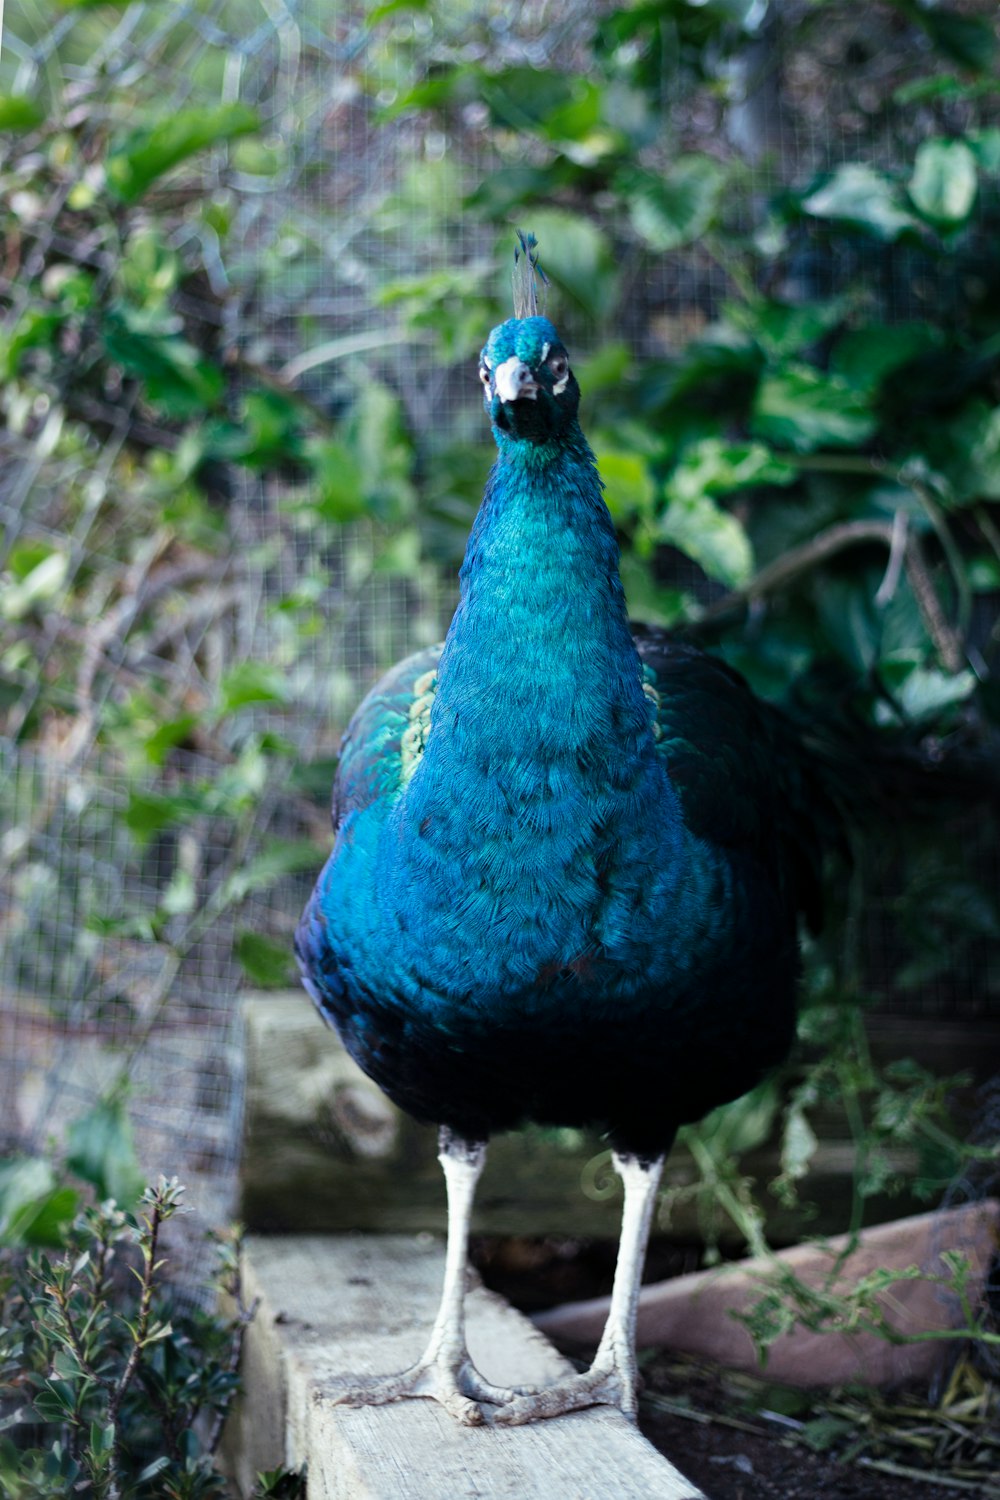 a peacock standing on a piece of wood